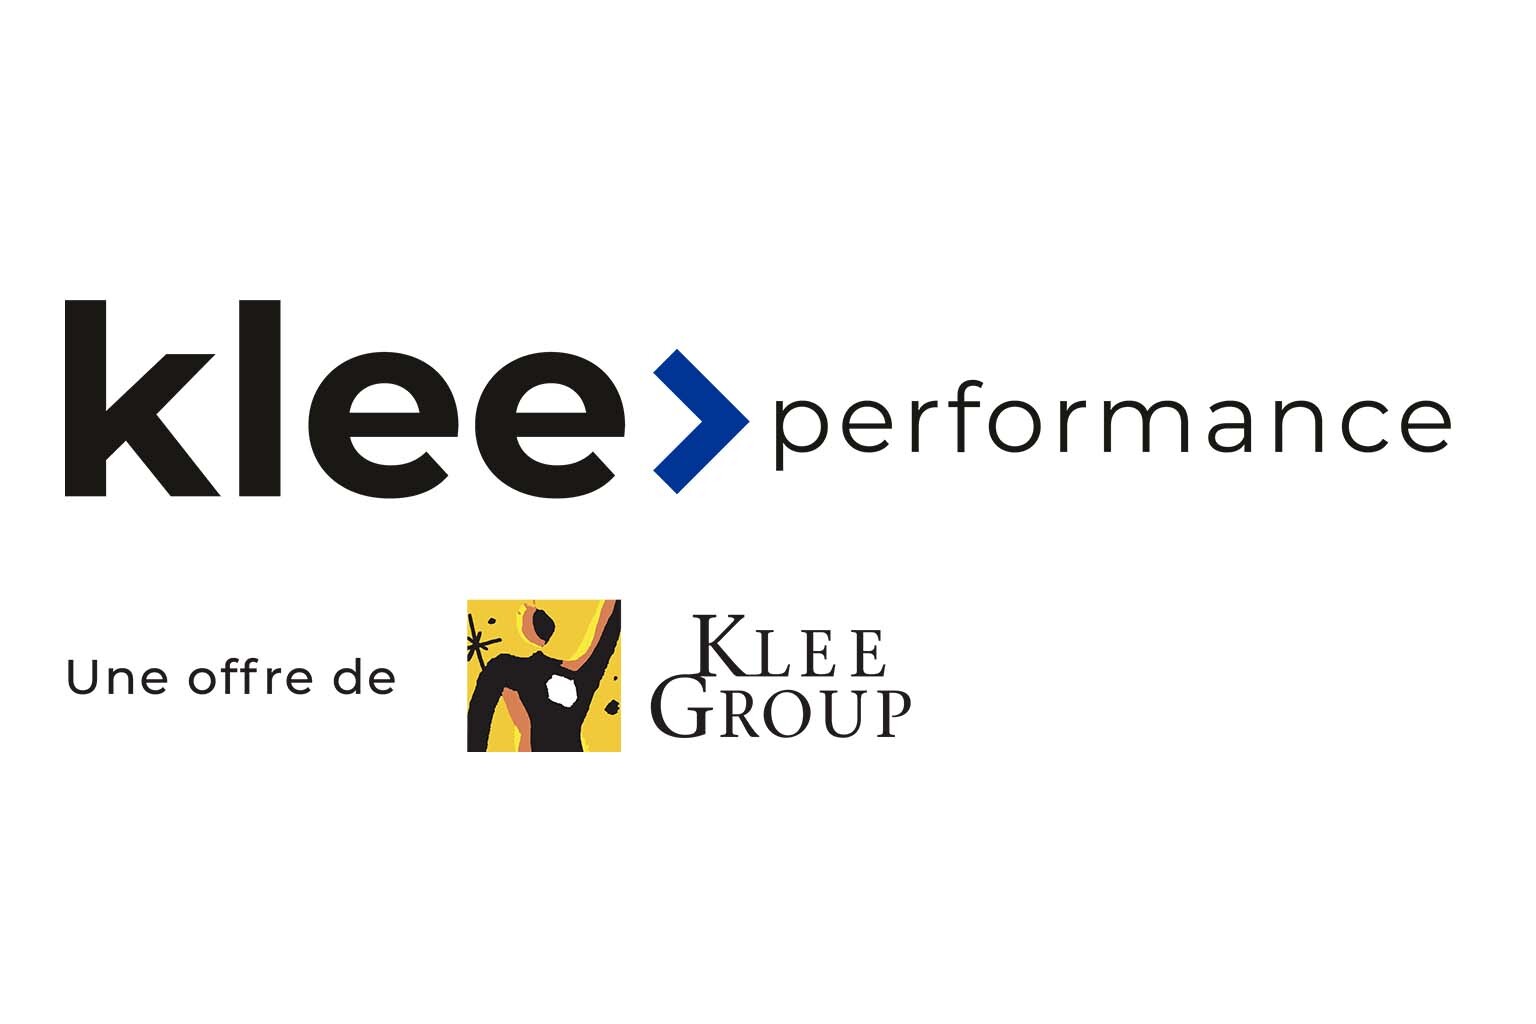 Logo Klee Performance - CCH Tagetik | Wolters Kluwer